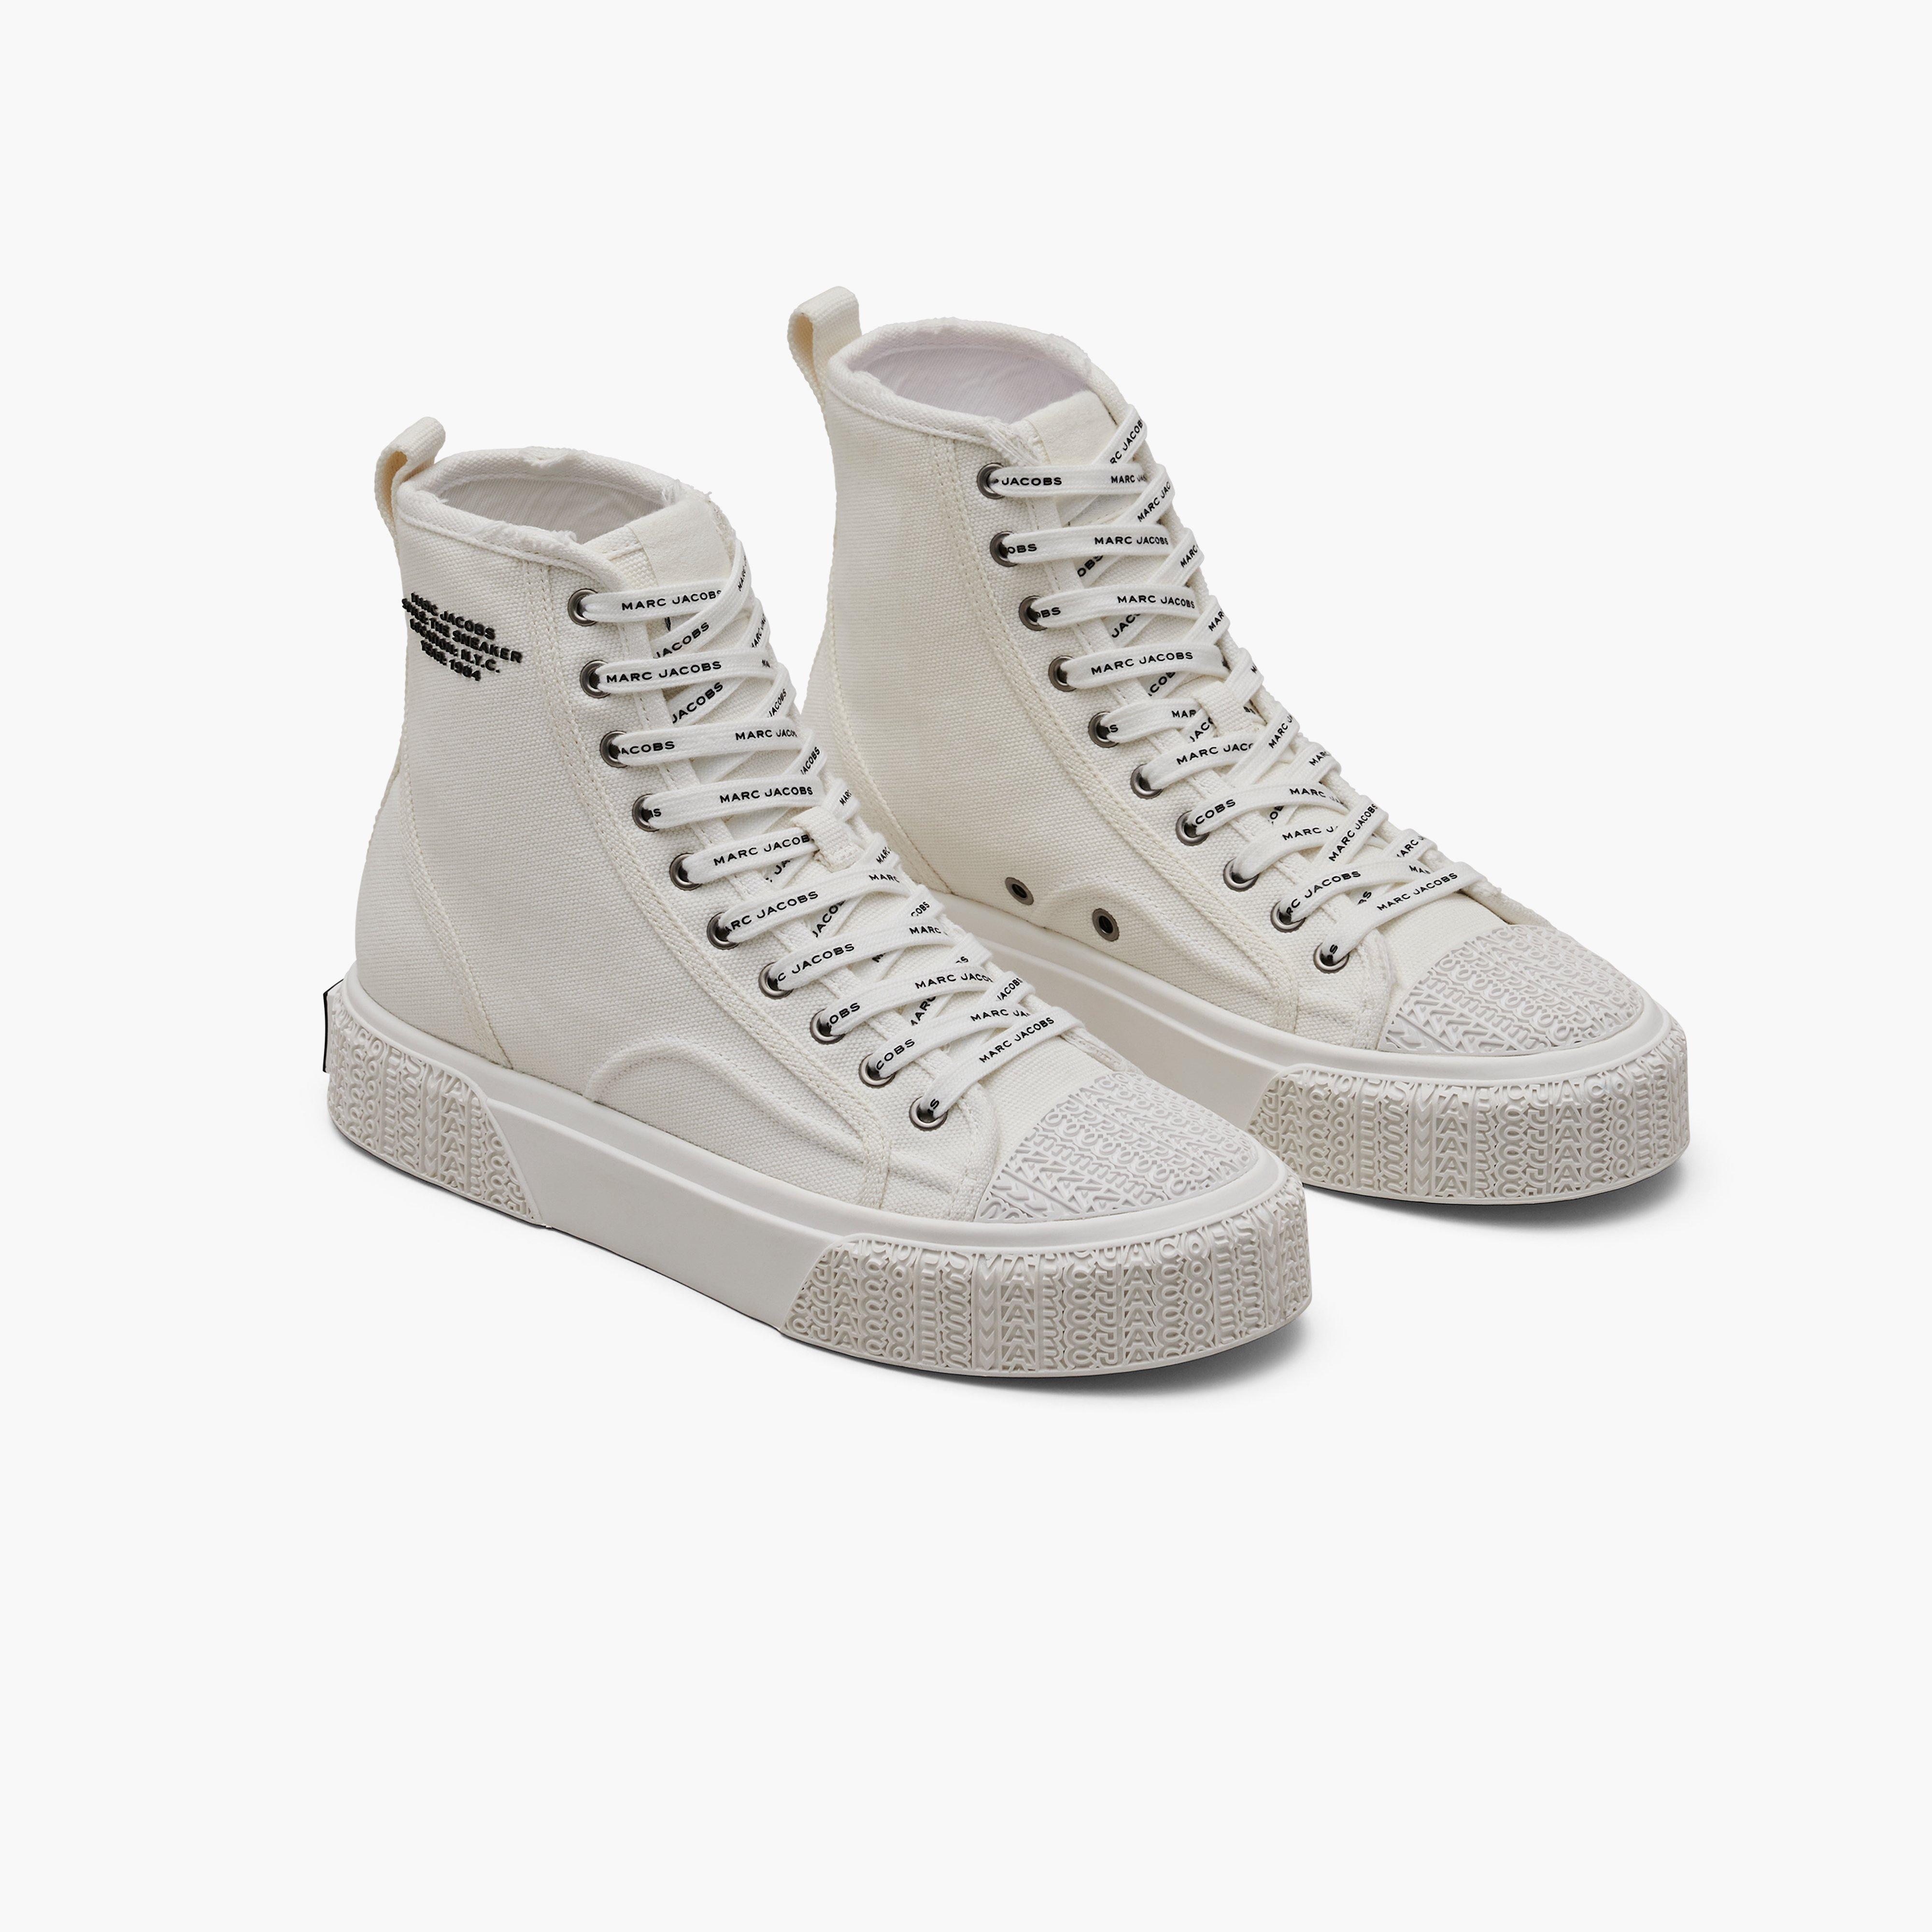 Marc by Marc jacobs The High Top Sneaker,WHITE